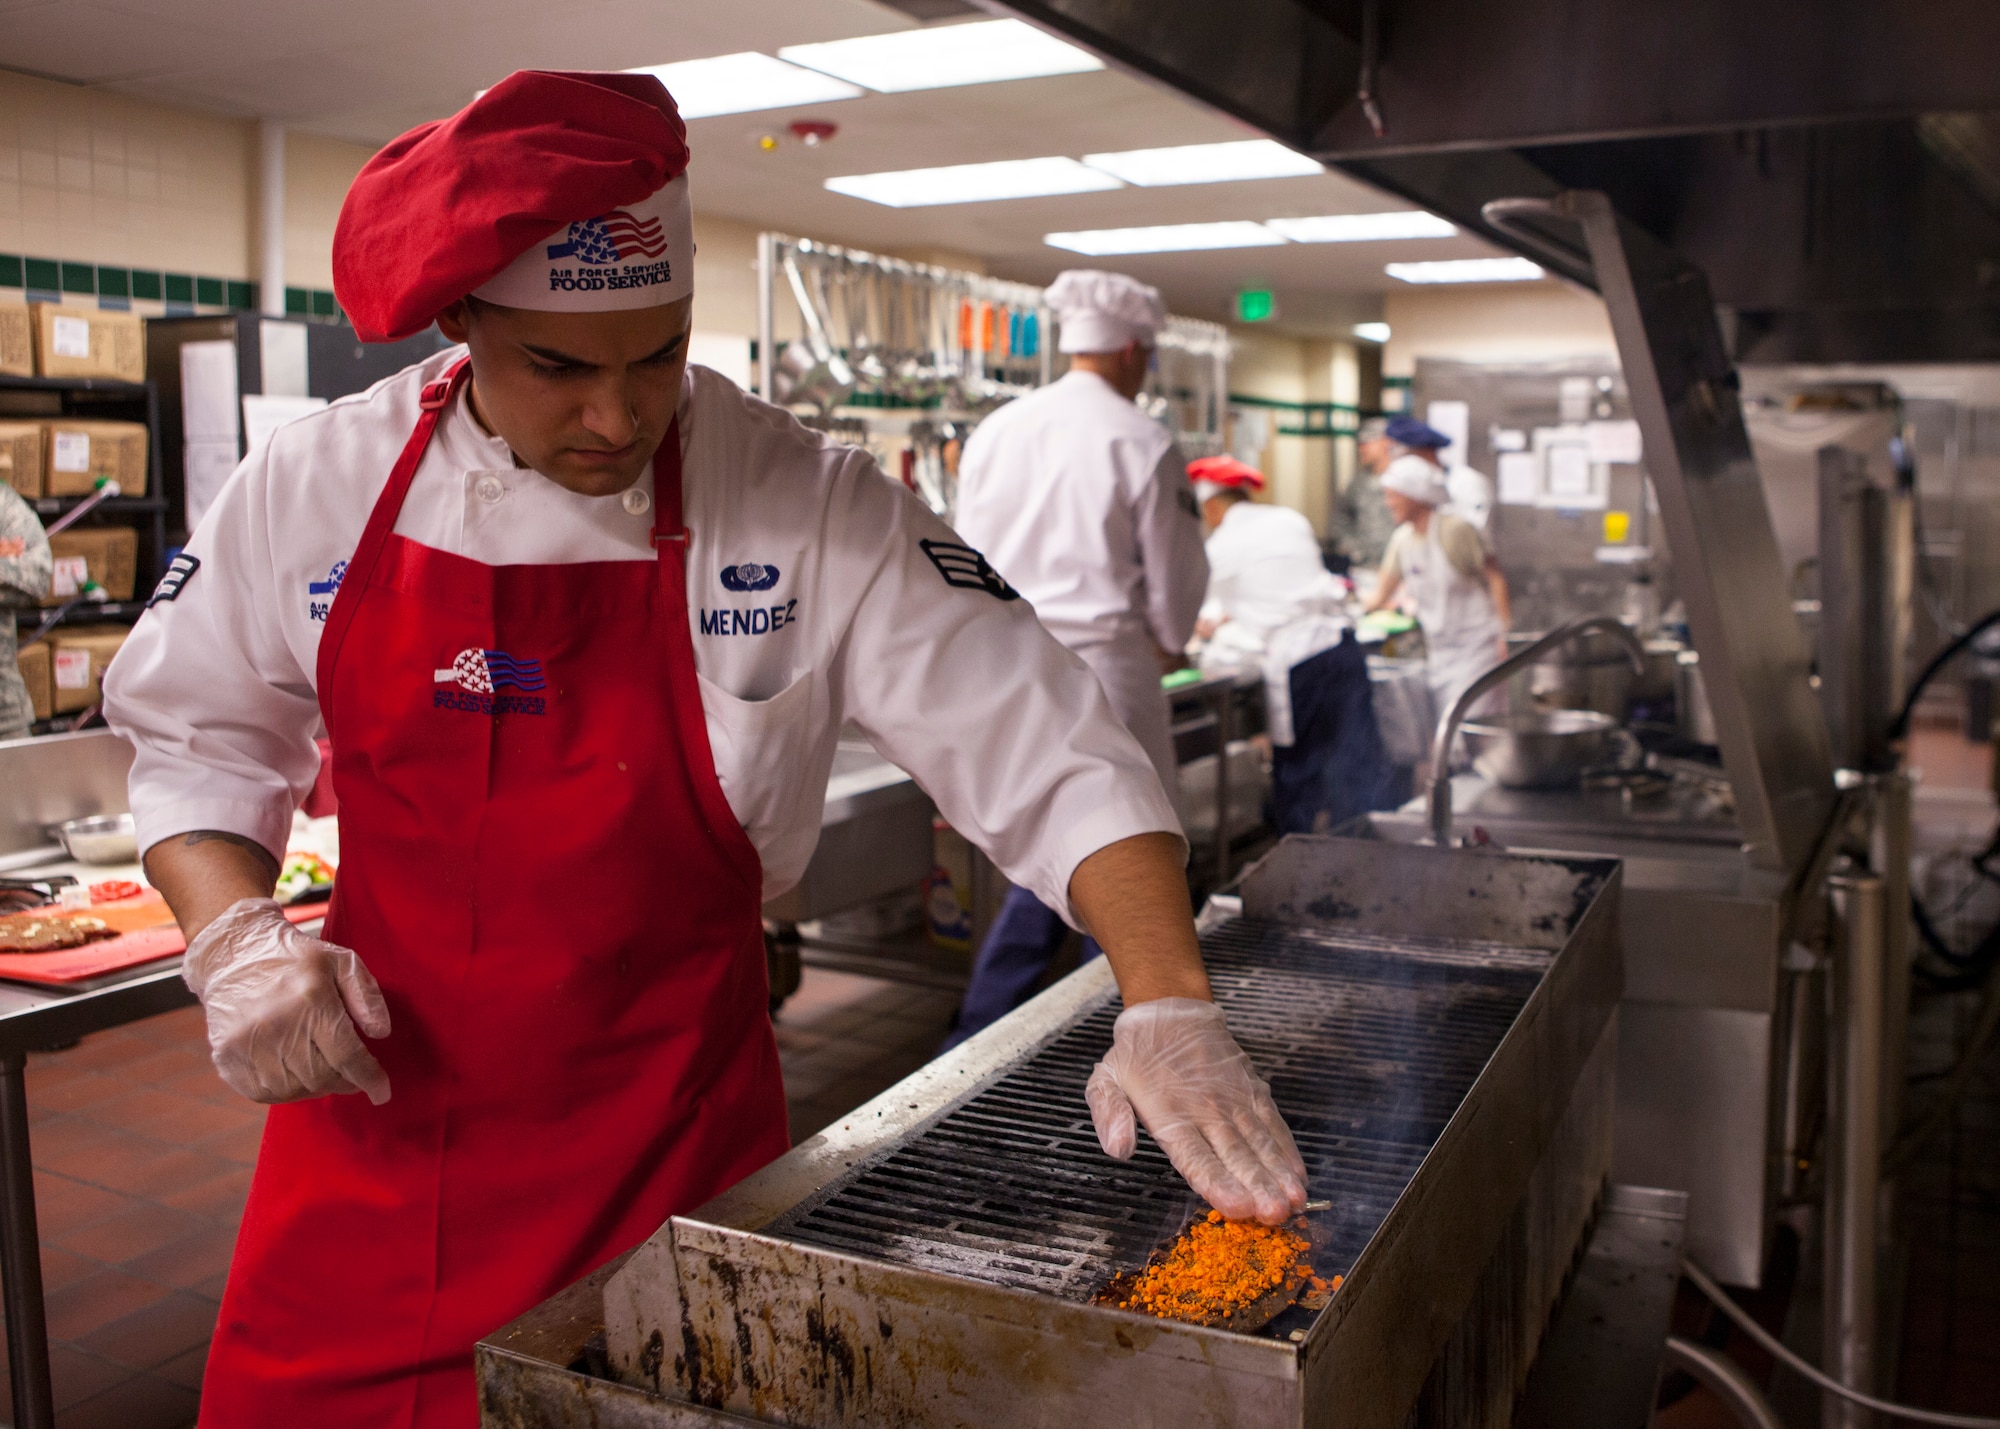 Senior Airman Joashua Mendez, 90th Force Support Squadron food service specialist, spreads a crumble made of cheese crackers on a steak during a culinary competition held at the Chadwell Dining Facility on F.E. Warren Air Force Base, Wyo., Aug. 27, 2015. Three teams of three chefs were pitted against each other vying for a spot to compete at the Global Strike Challenge. (U.S. Air Force photo by Lan Kim)